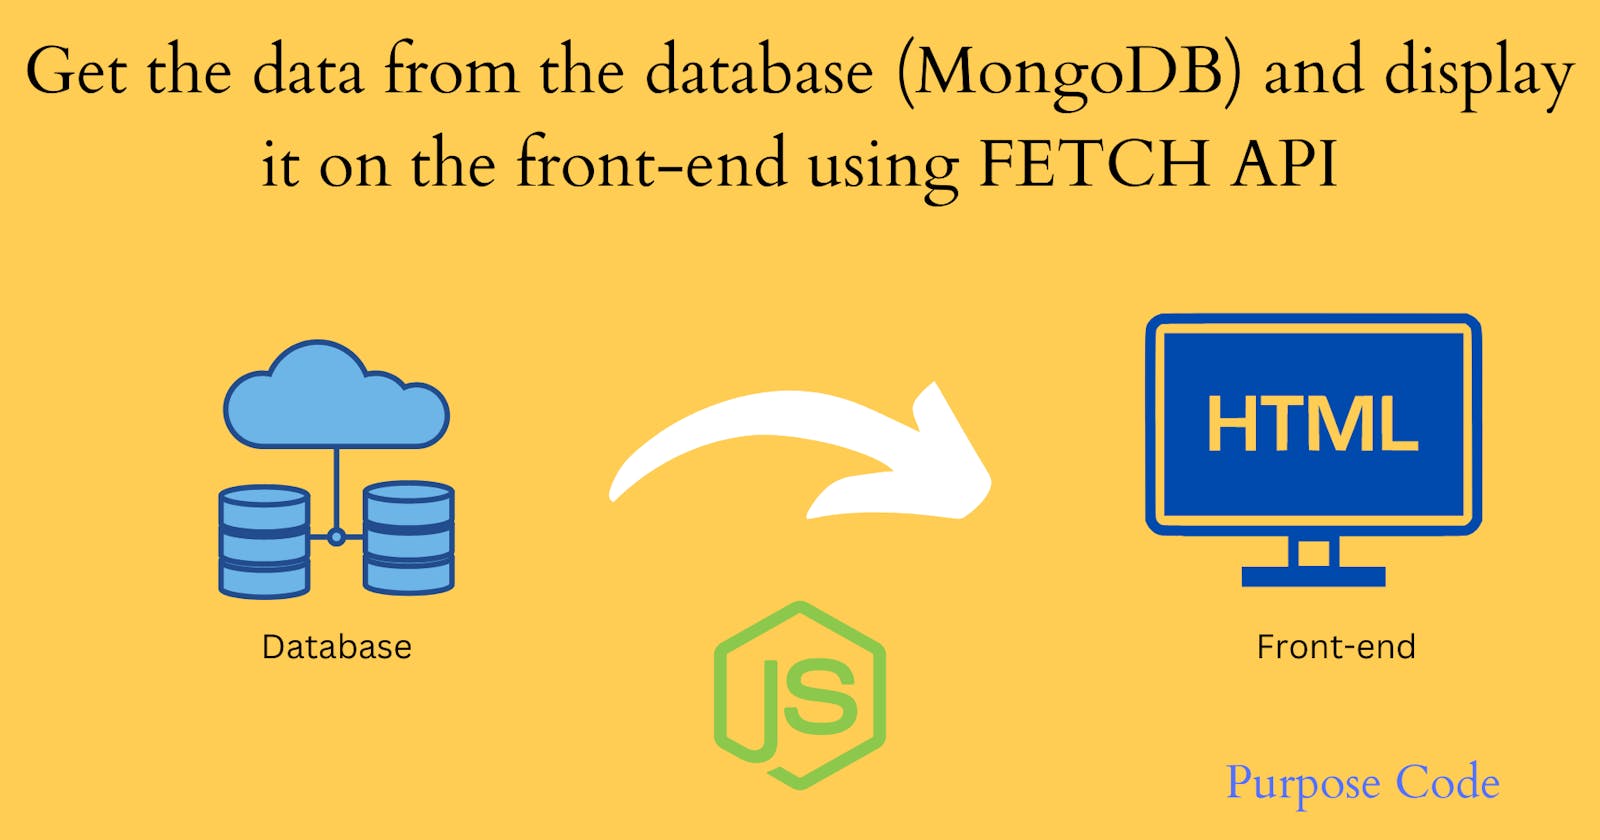 How to get data back from MongoDB and display it on the browser using fetch API?